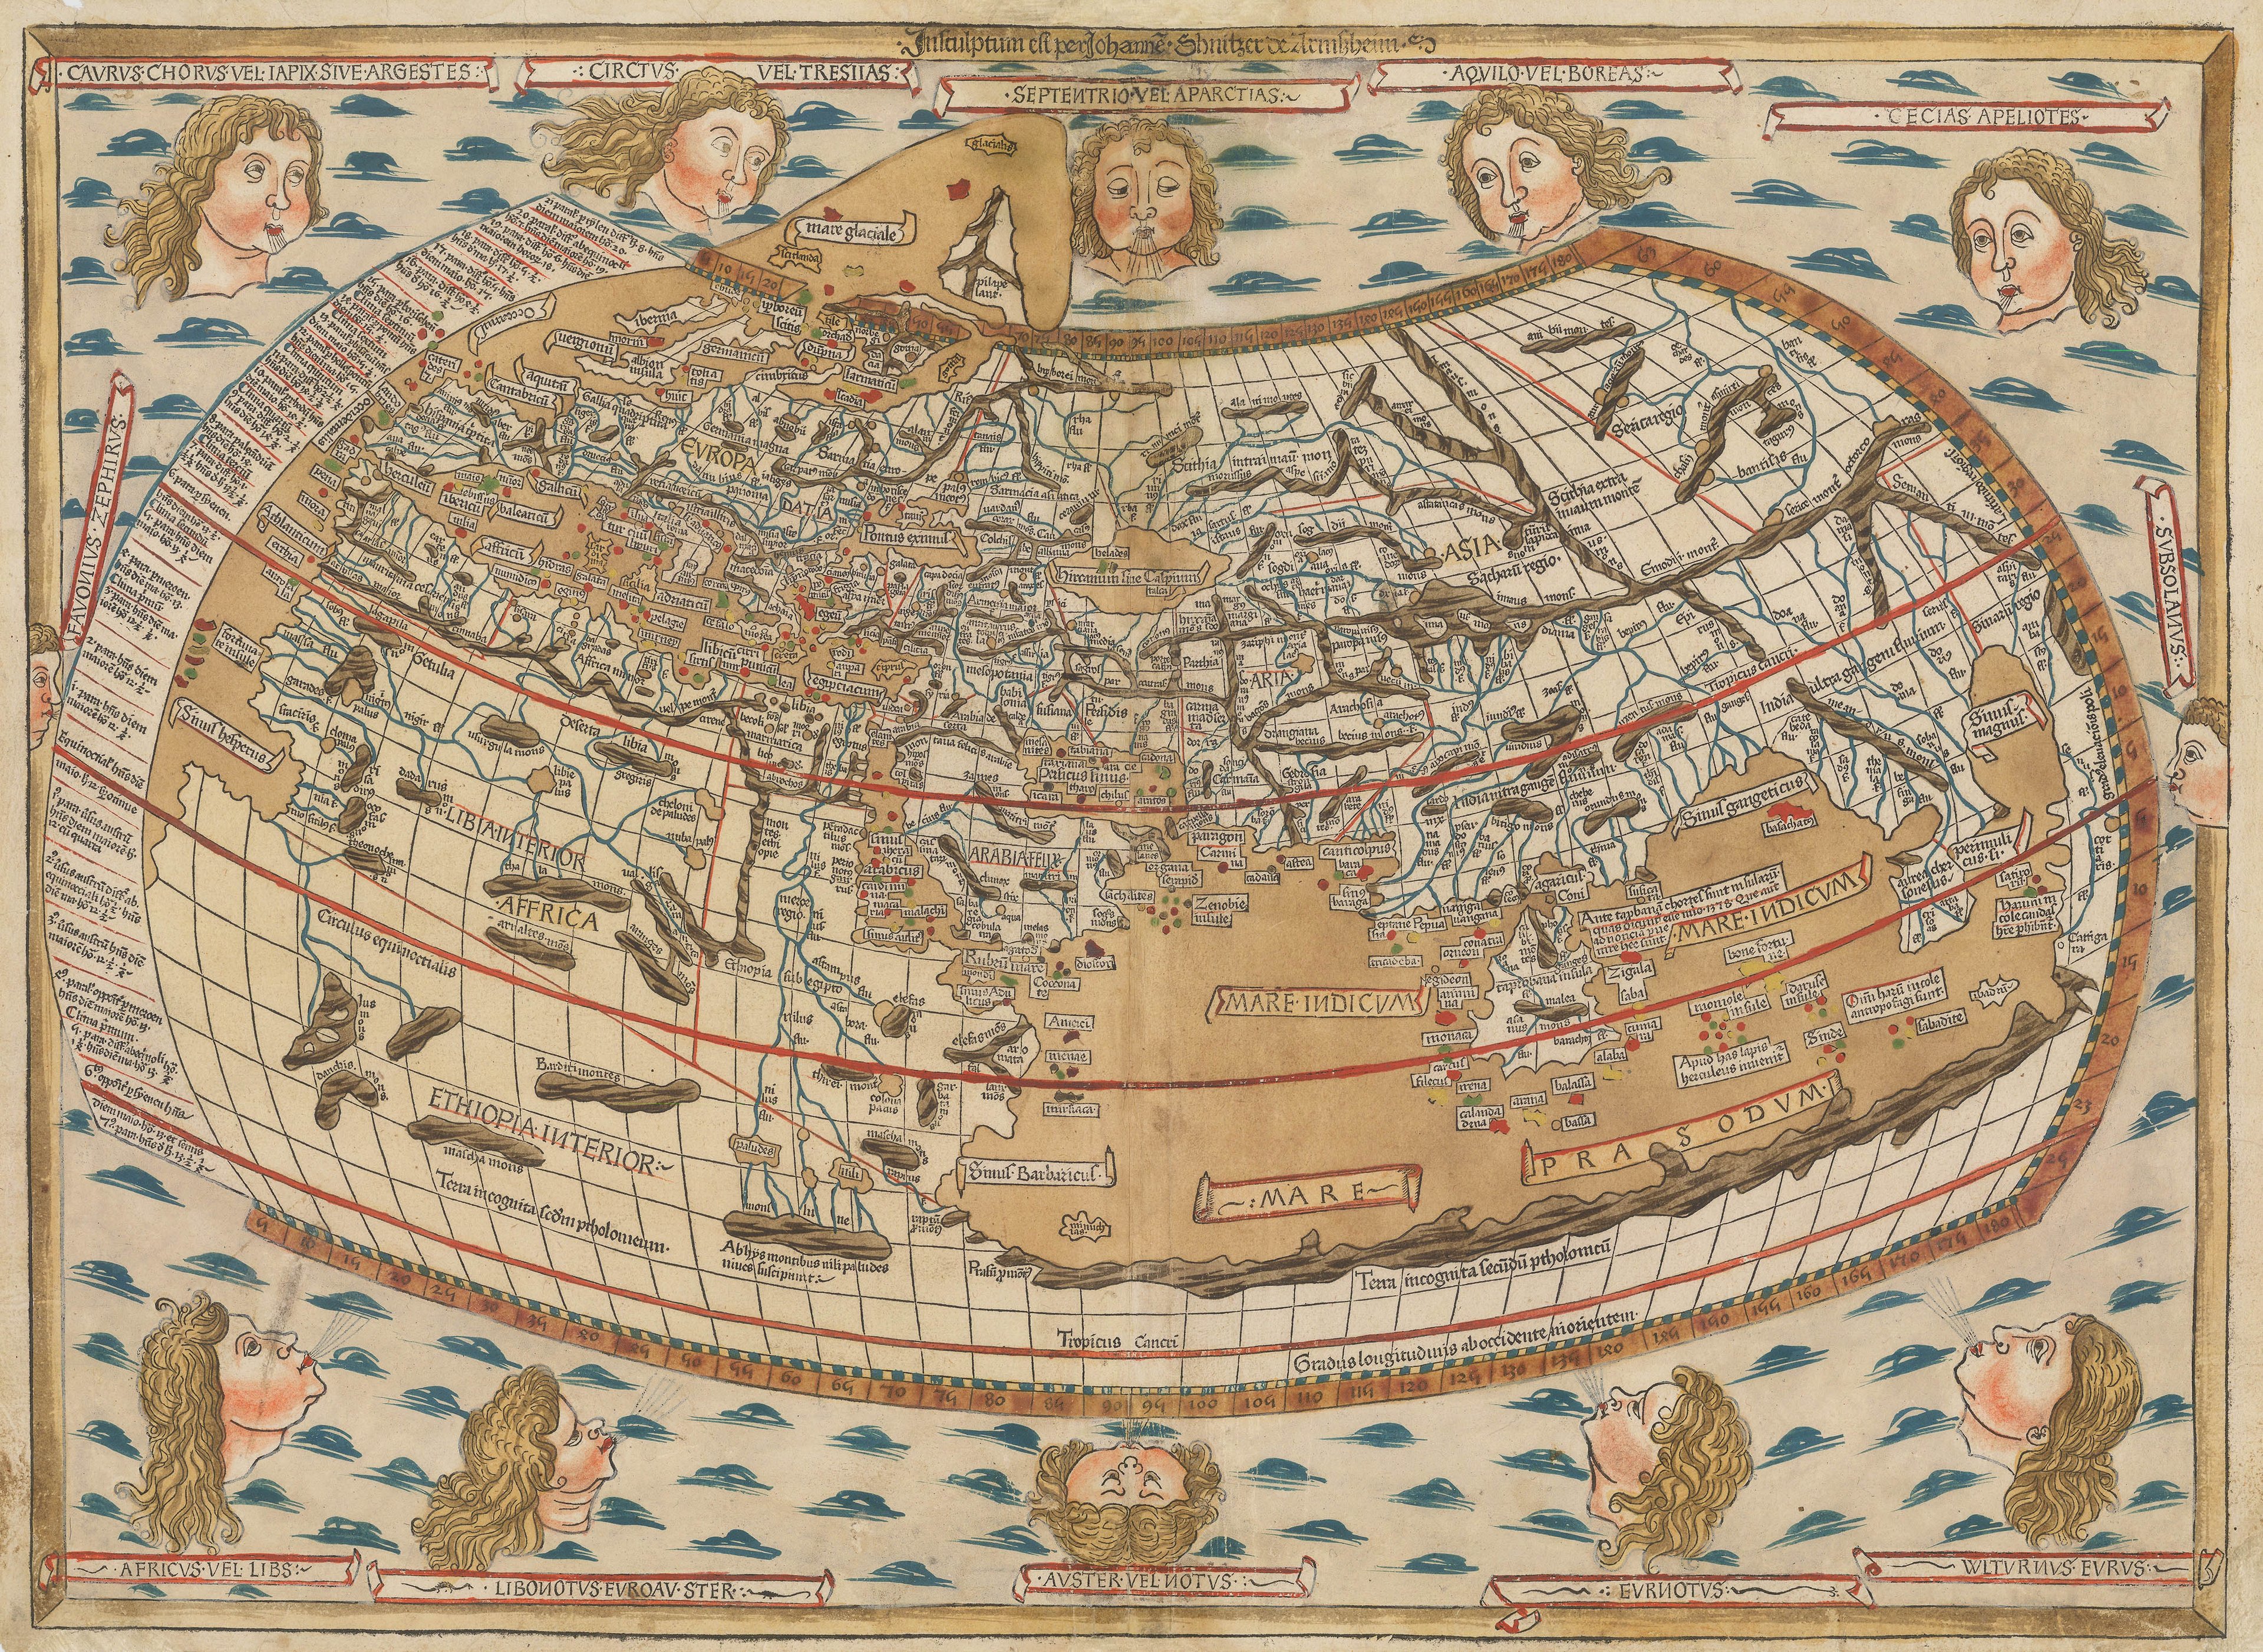 Preview of Johann Reger's re-issue of the famous Ulm Ptolemaic map in original colour with 12 Windheads around the outside